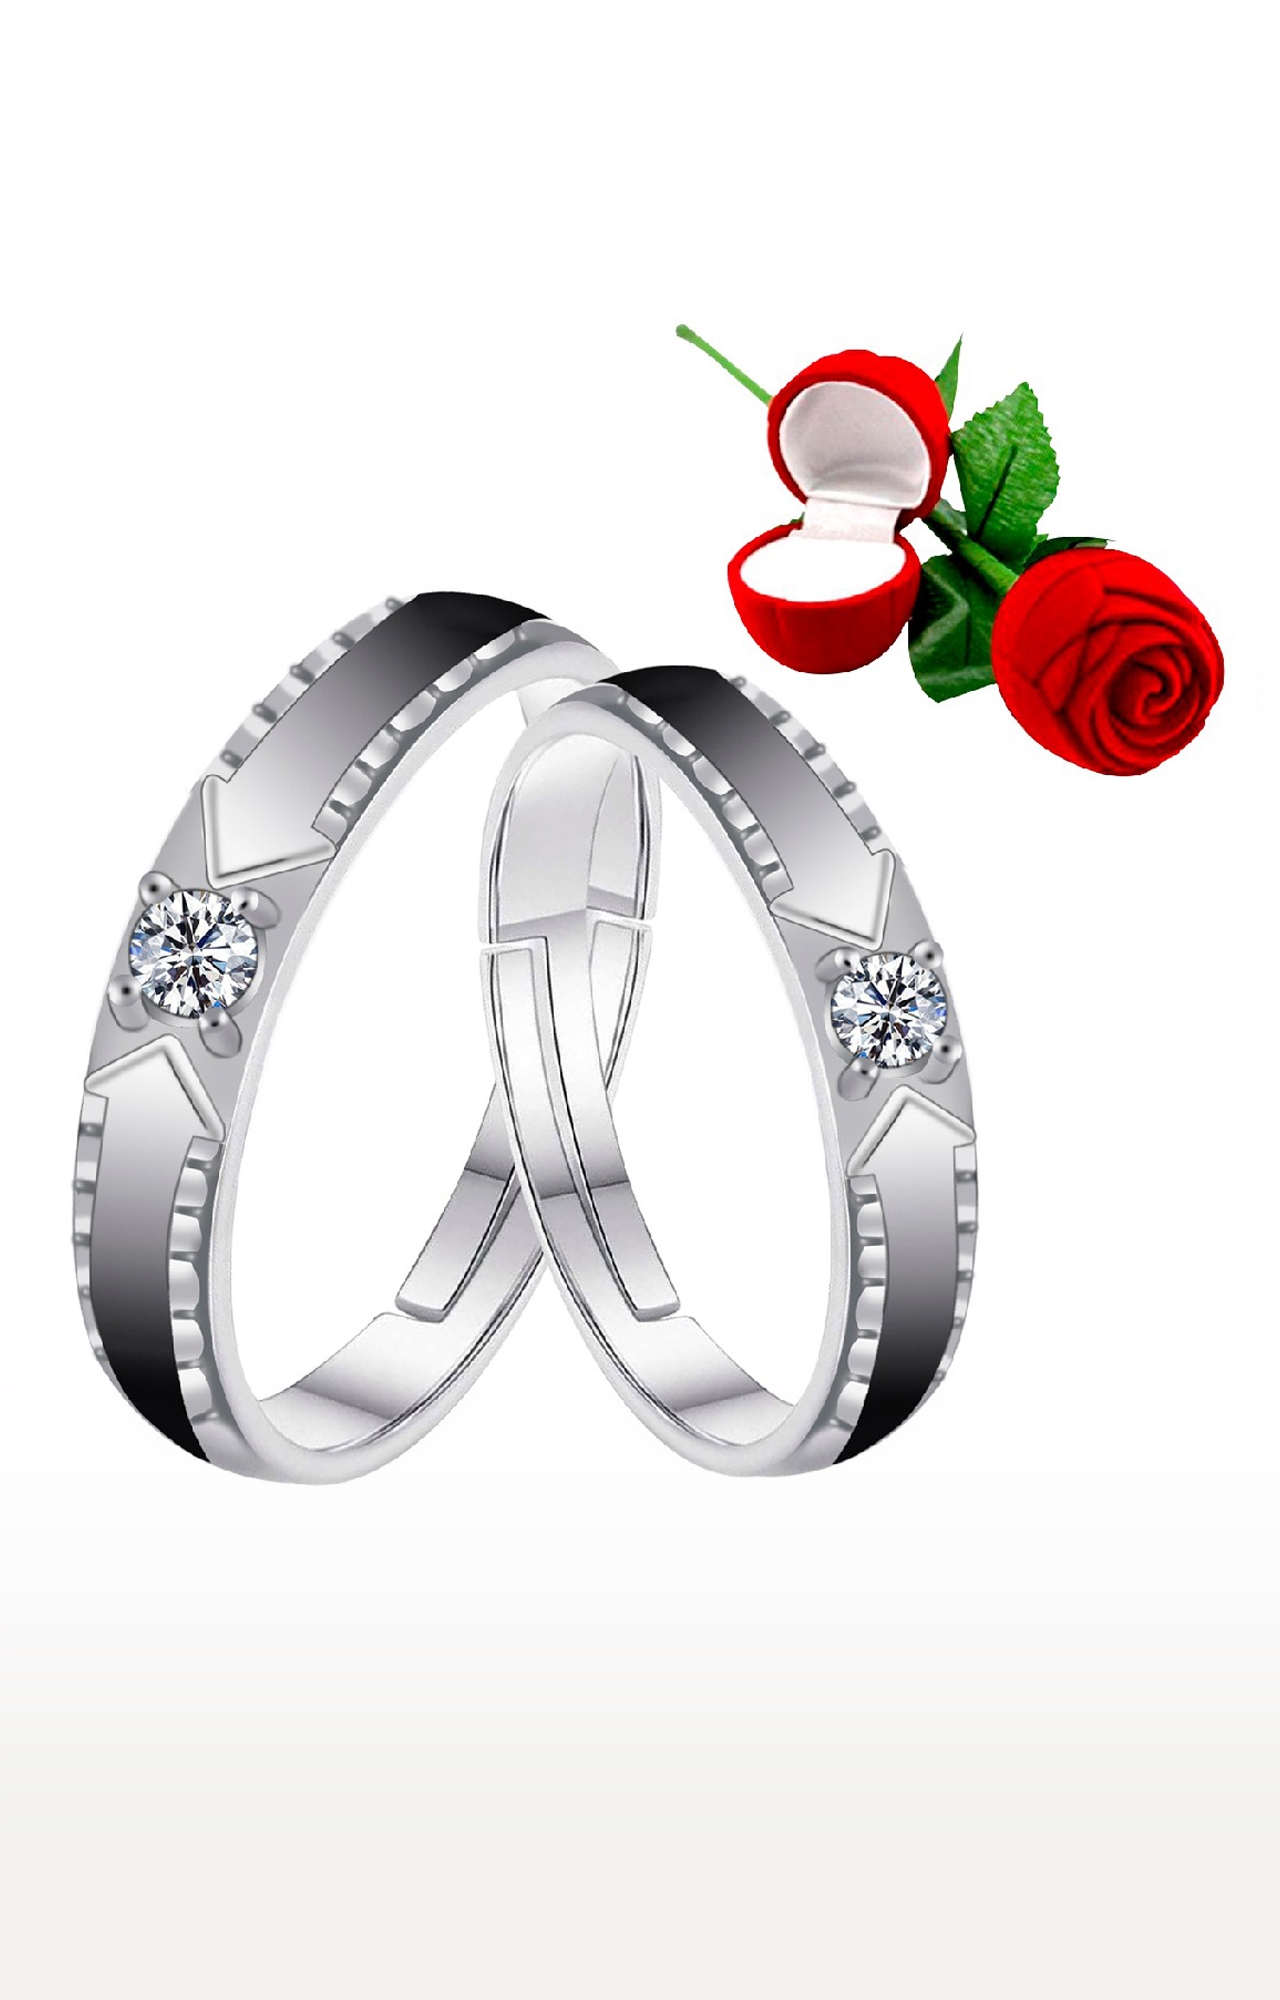 SILVER SHINE |  Silver Plated Adjustable Couple Rings Set for lovers Ring with 1 Piece Red Rose Gift Box for Men and Women